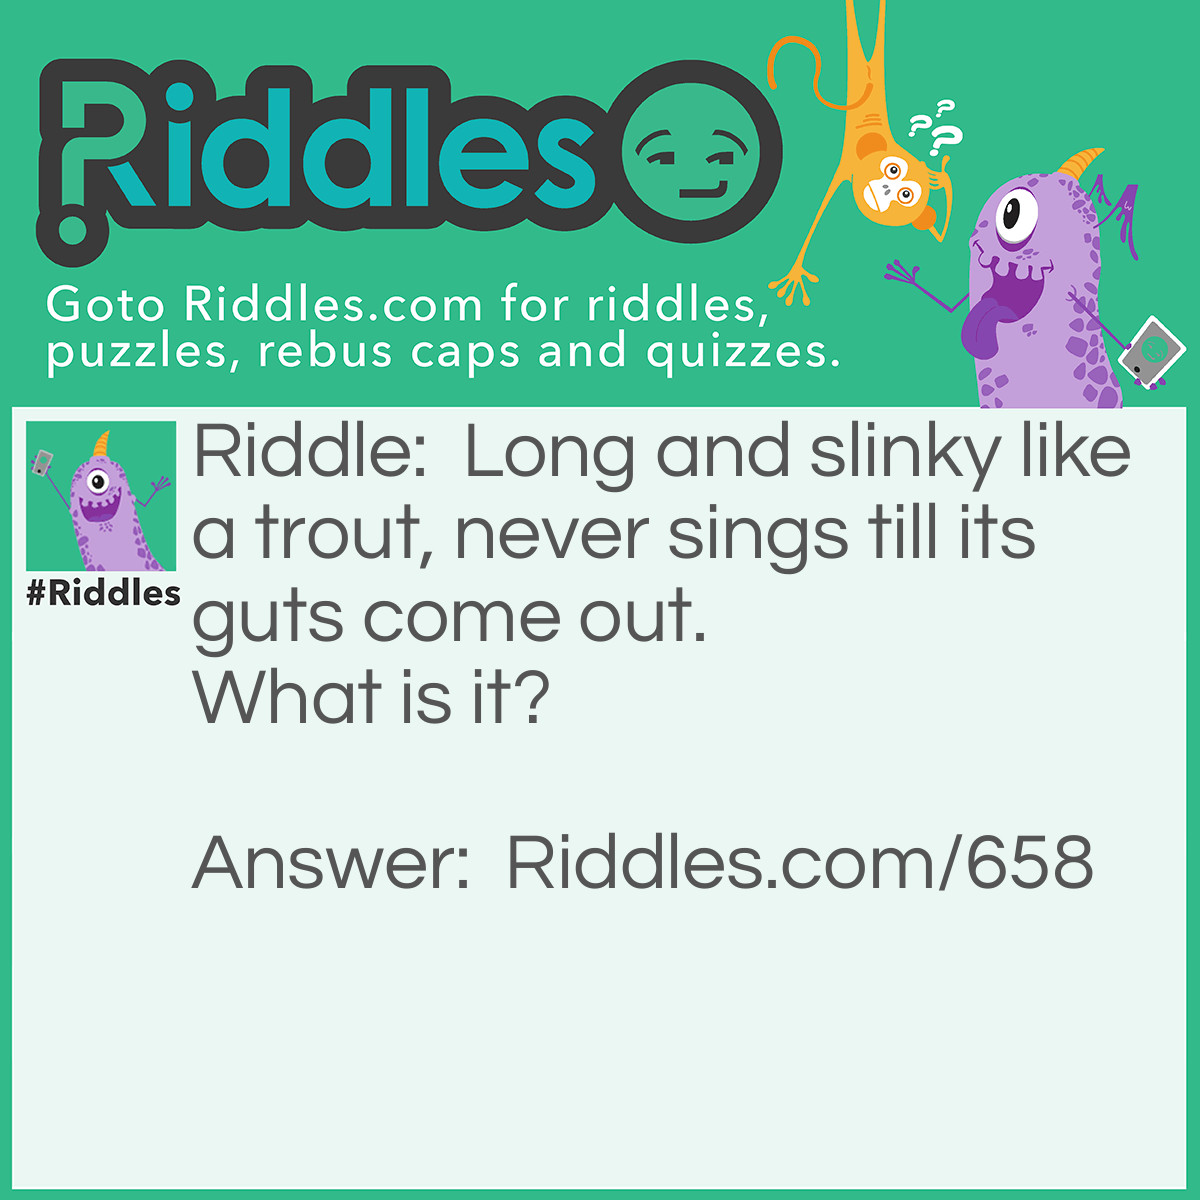 Riddle: Long and slinky like a trout, never sings till its guts come out.  What is it? Answer: It is a gun.